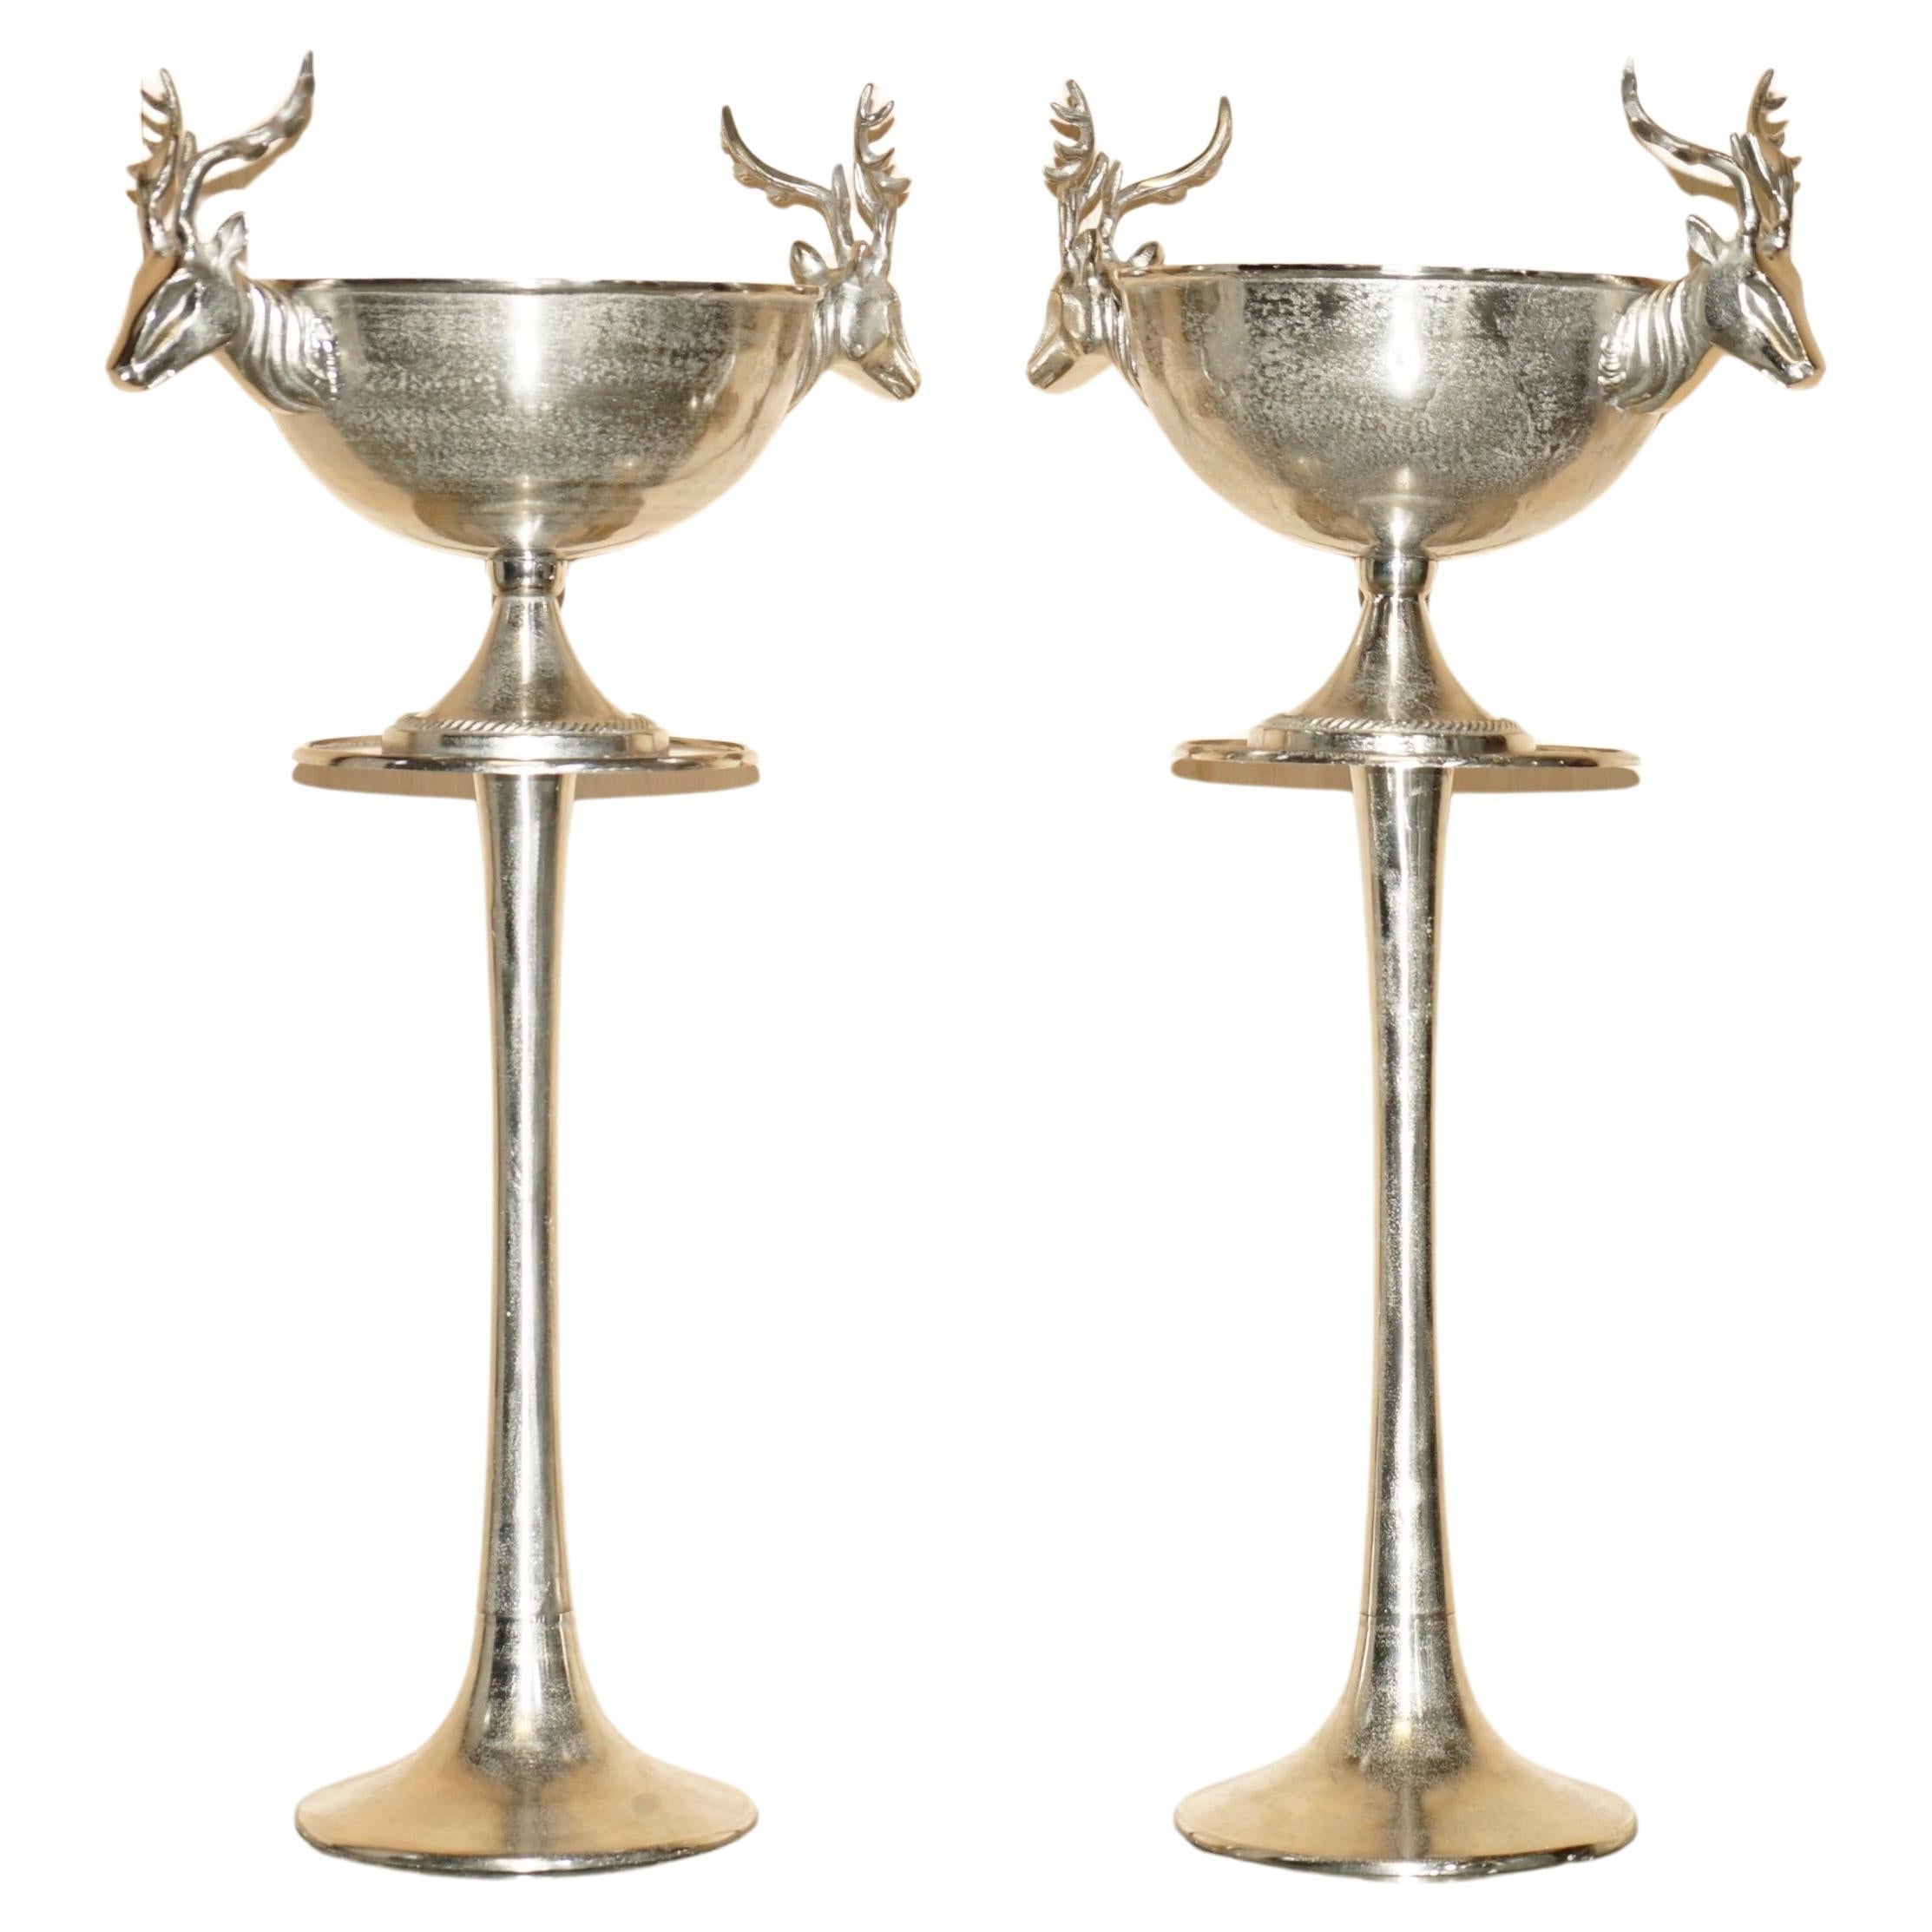 PAIR OF EXQUISITE EXTRA LARGE 114.5CM TALL STAG CHAMPAGNE BUCKETS ON SiDE TABLES For Sale